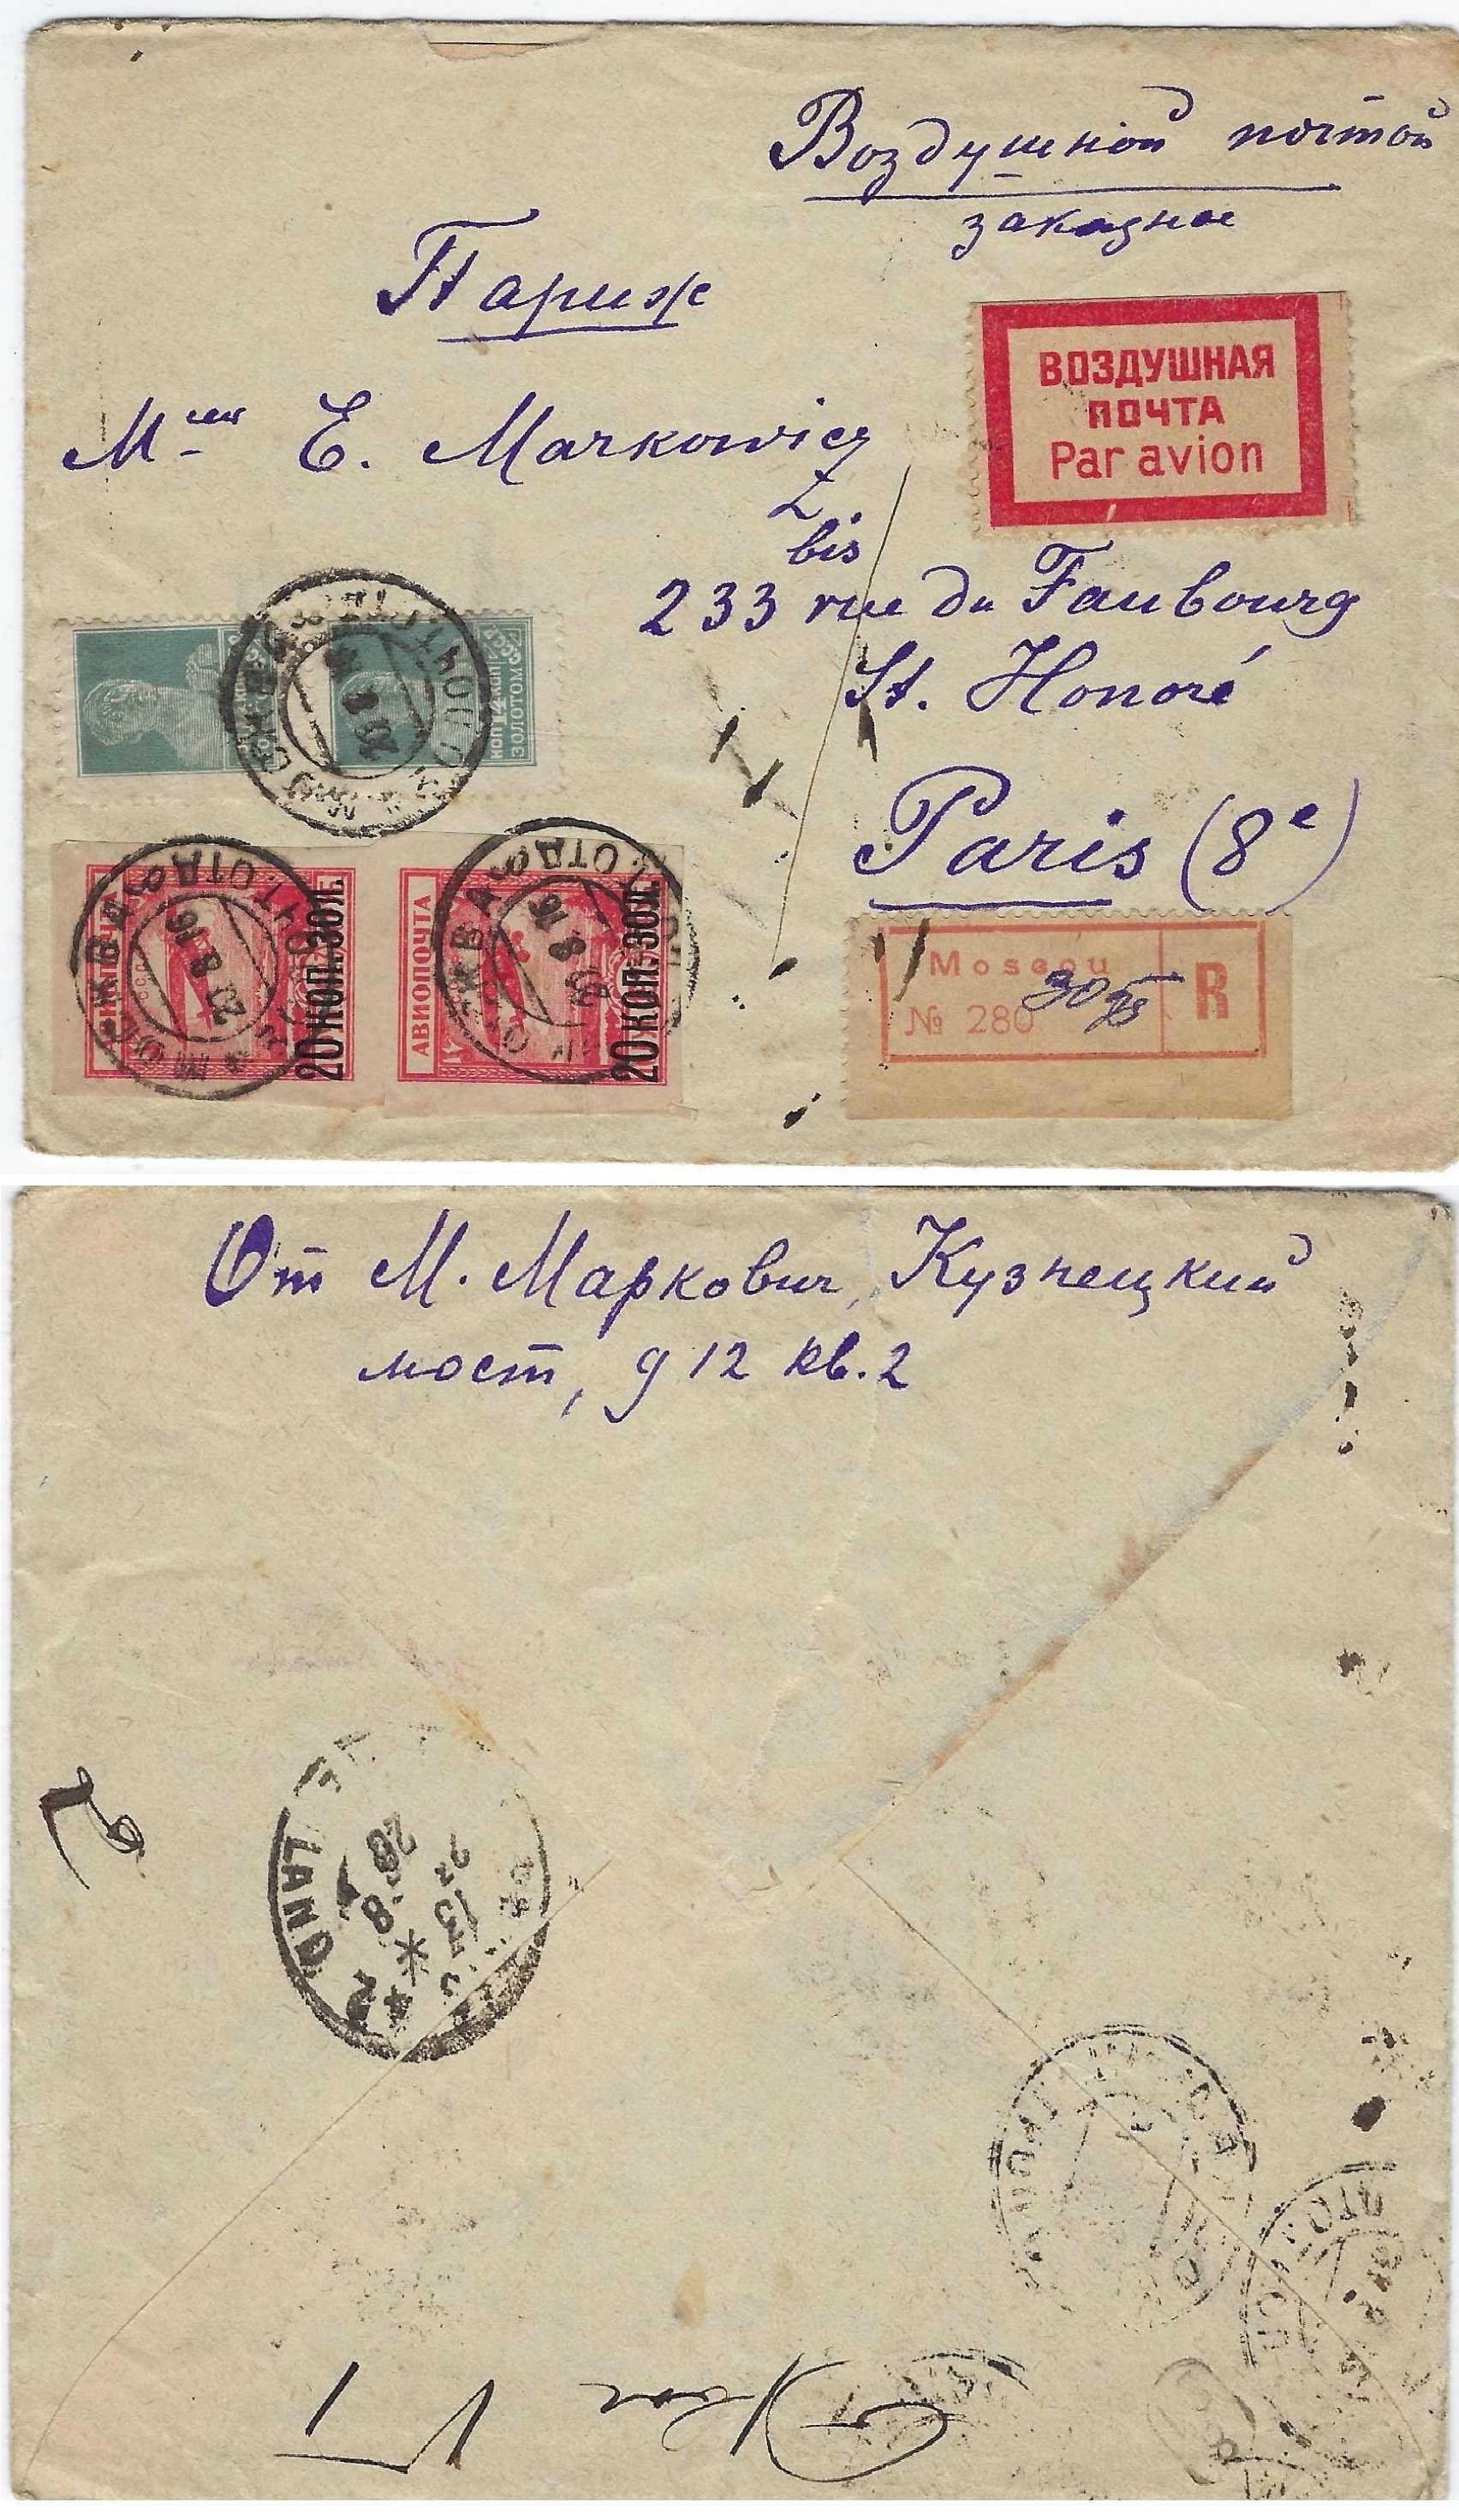 Russia Postal History - Airmails. Airmail covers Scott 1926 